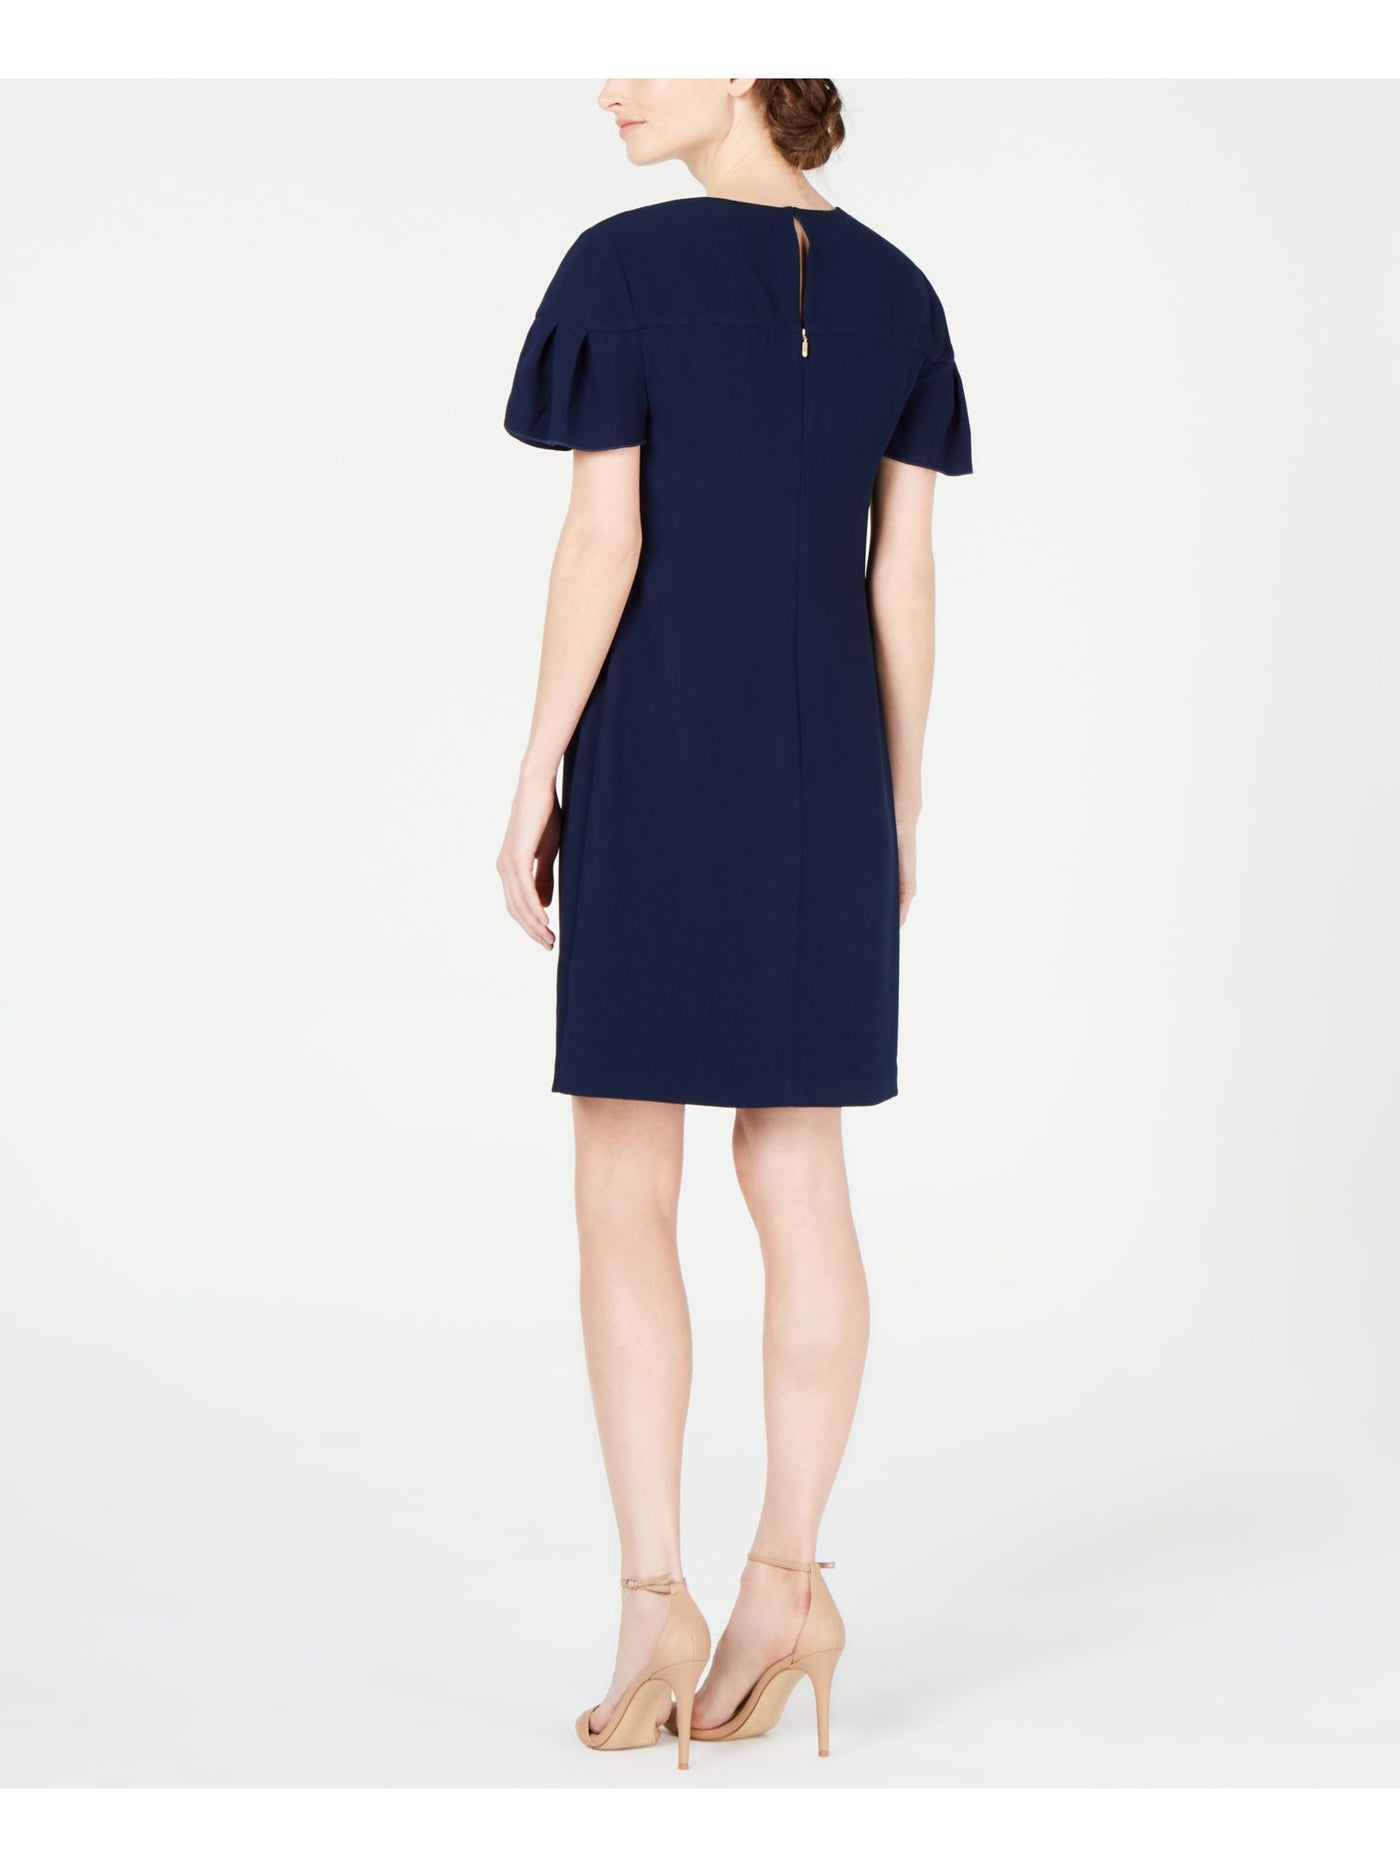 TRINA TURK Womens Crew Neck Above The Knee Party Shift Dress